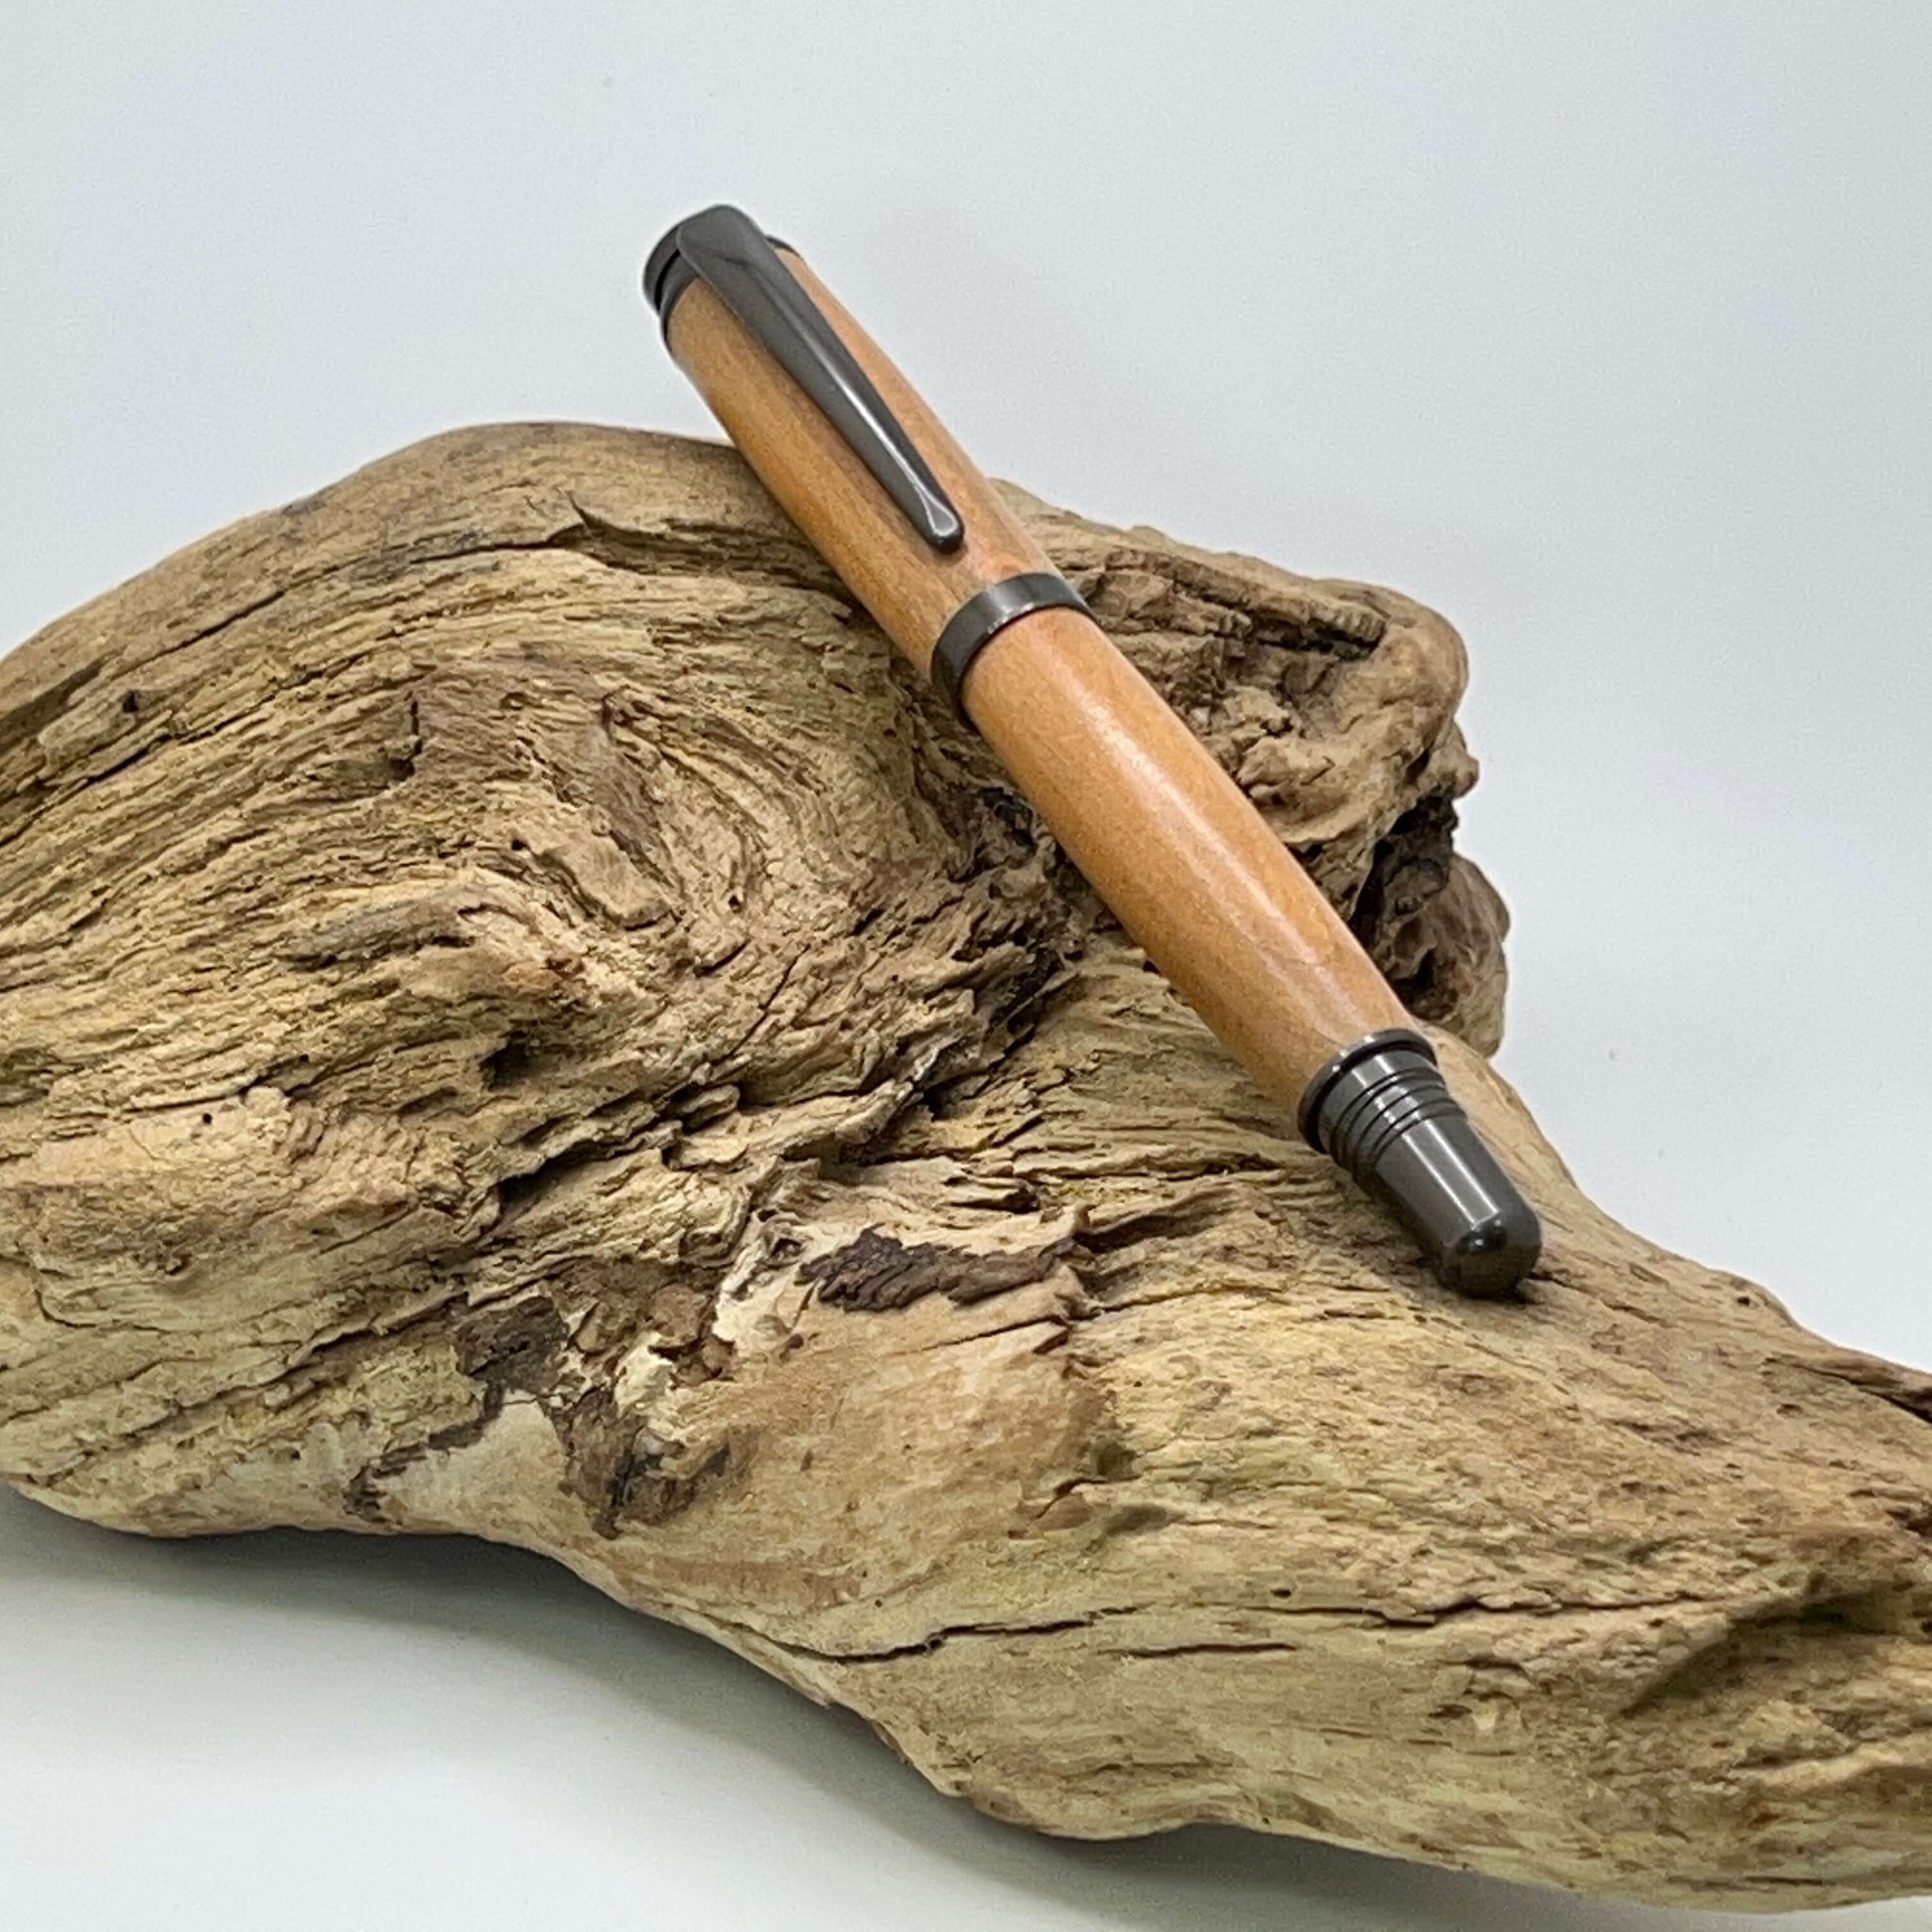 Handcrafted pen with cherry wood and satin gunmetal hardware setting on driftwood